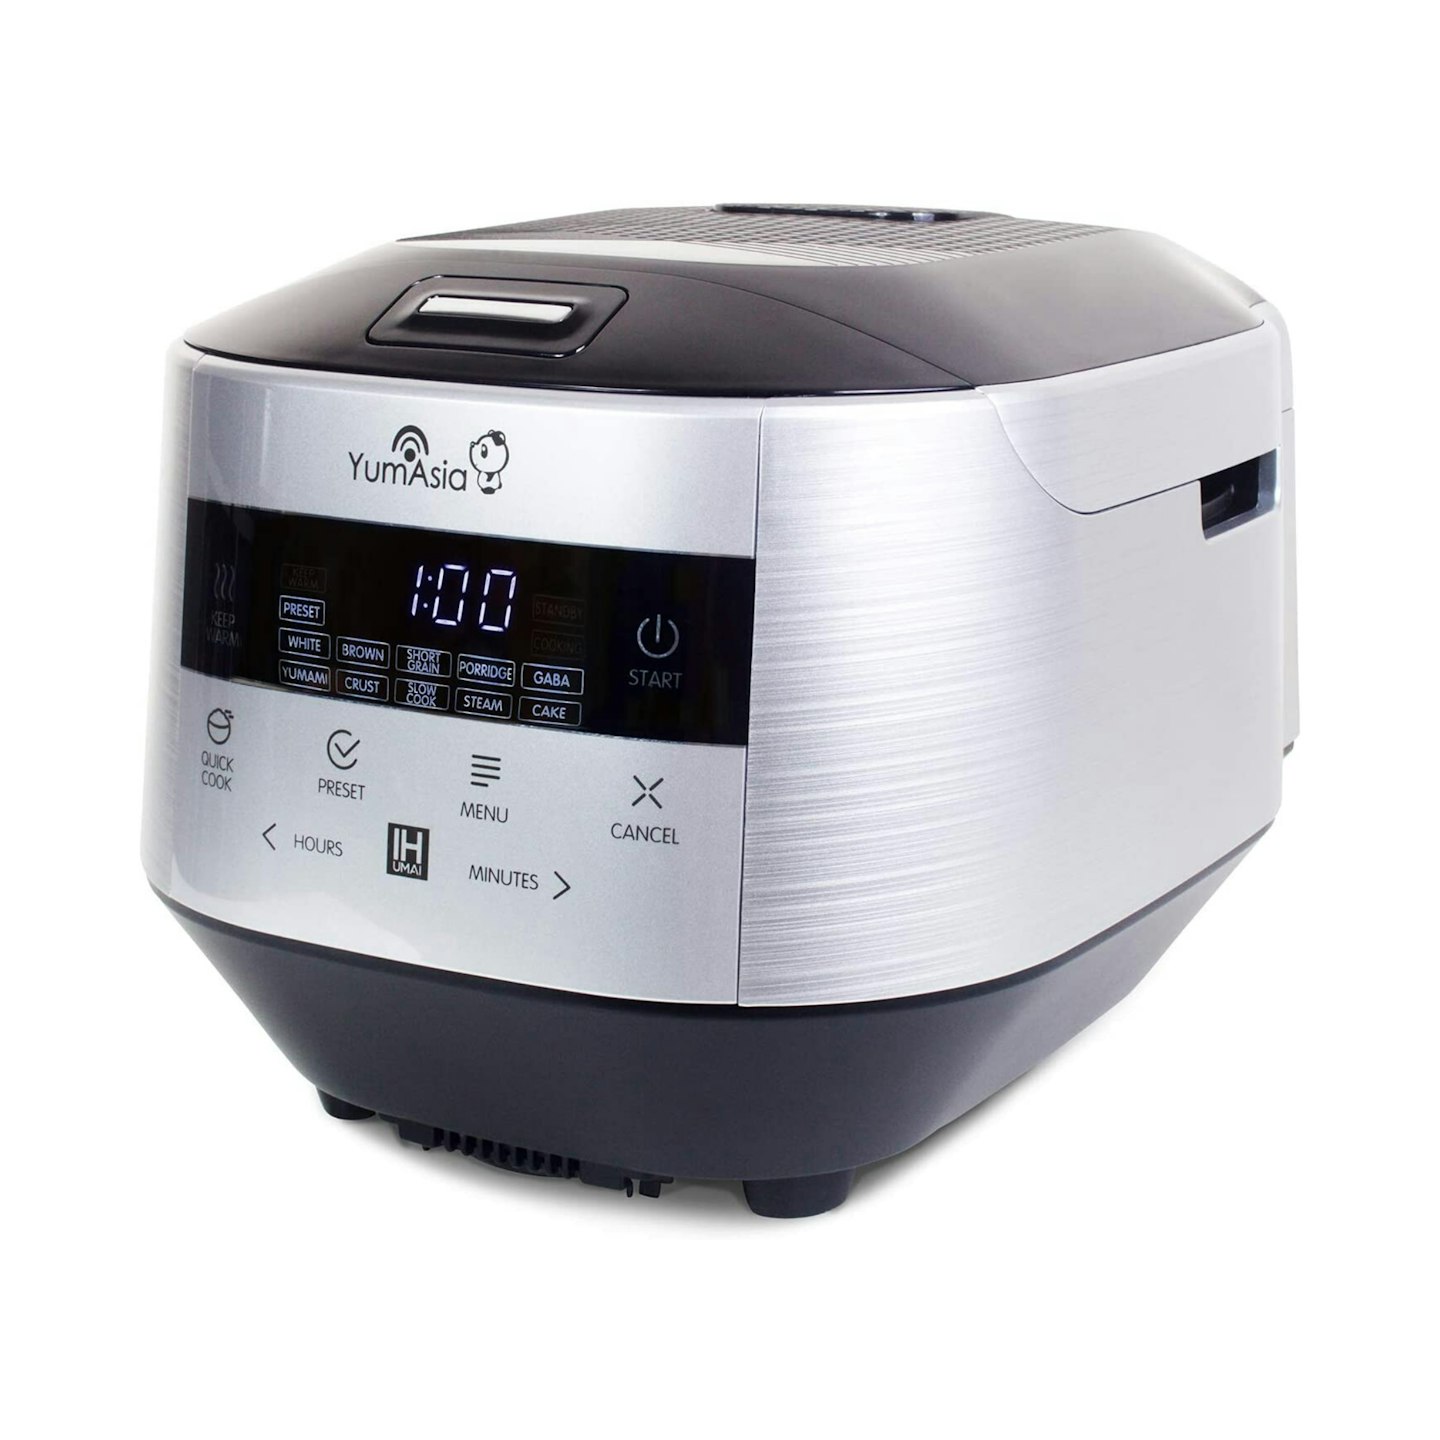 Buying A Ceramic Bowl Rice Cooker - Yum Asia World - Achieve Rice Cooking  Perfection